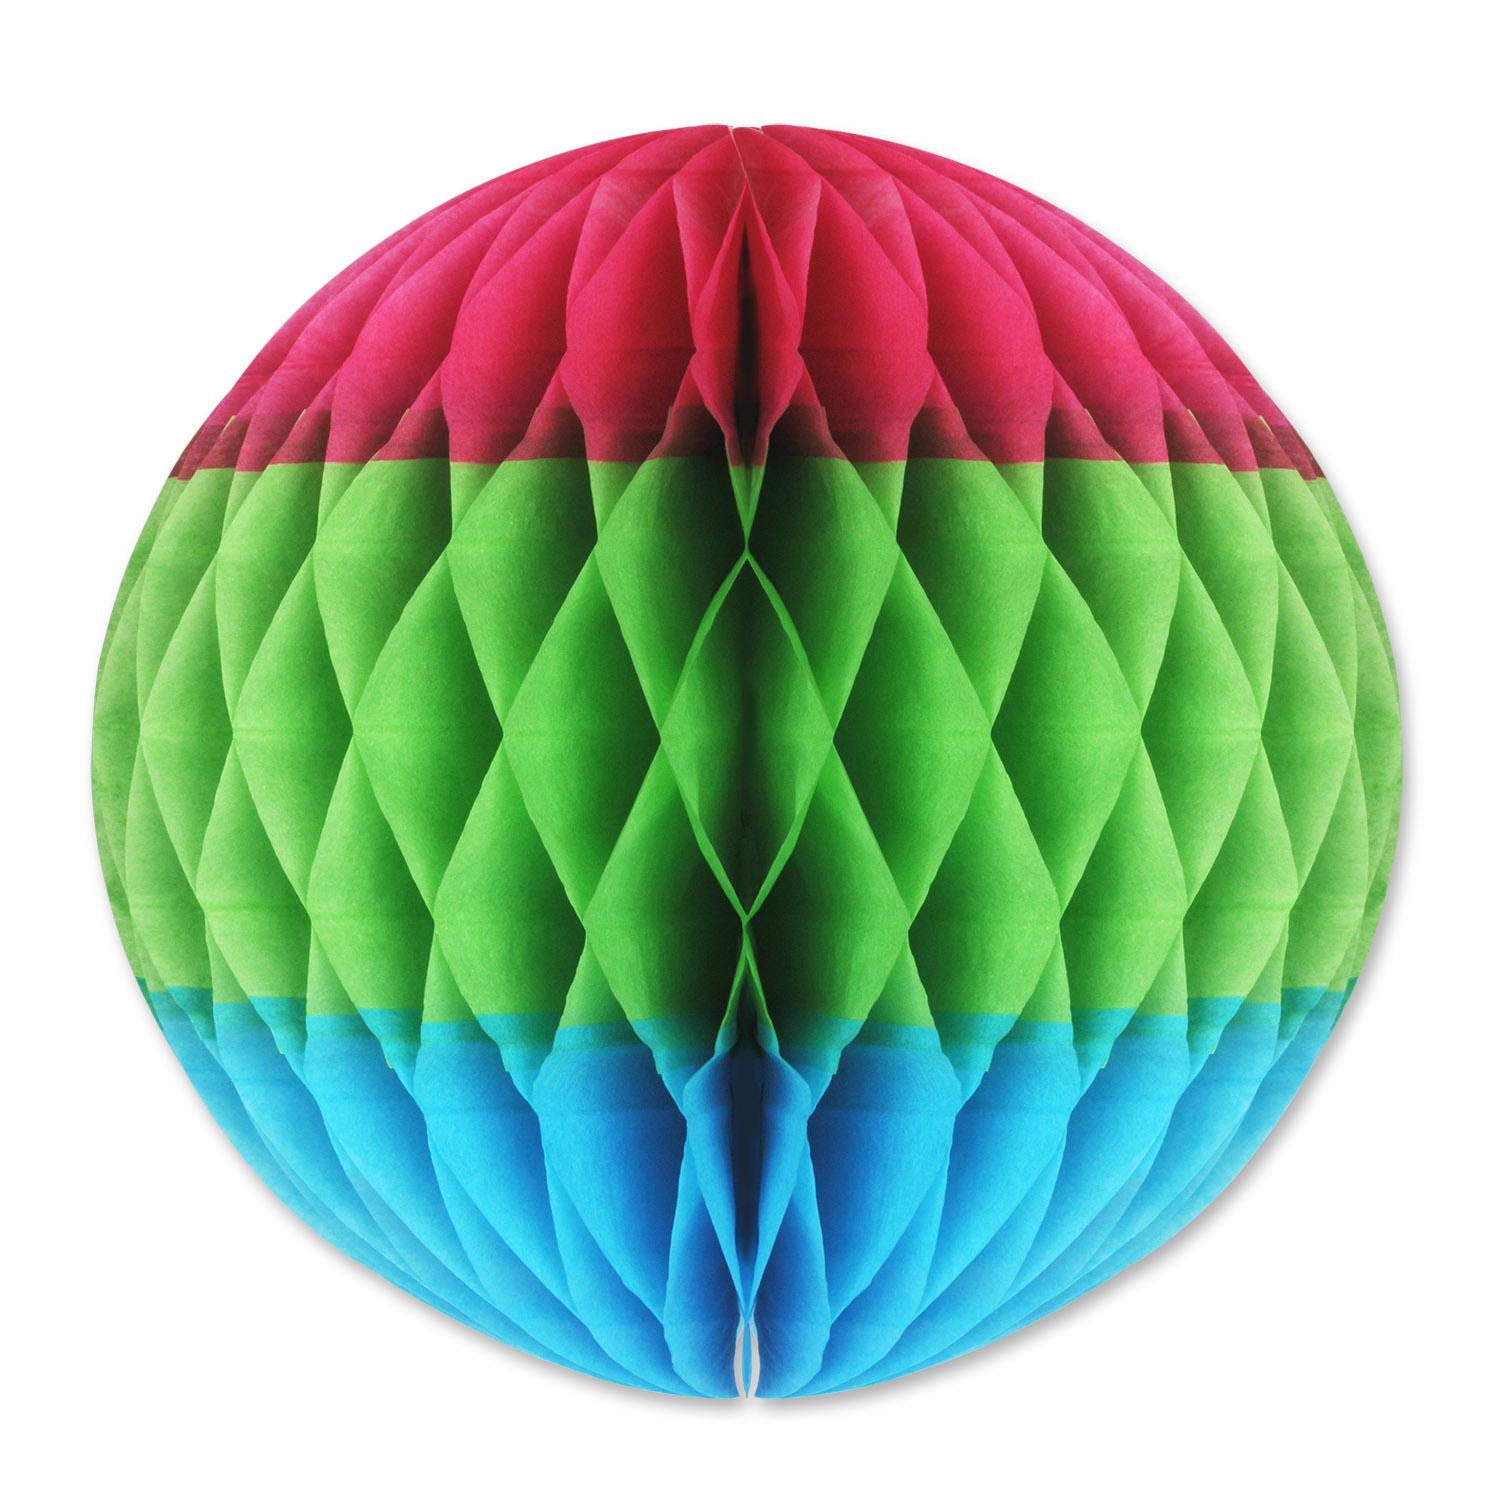 Tri-Color Tissue Ball Decoration- cerise - Light green - turquoise